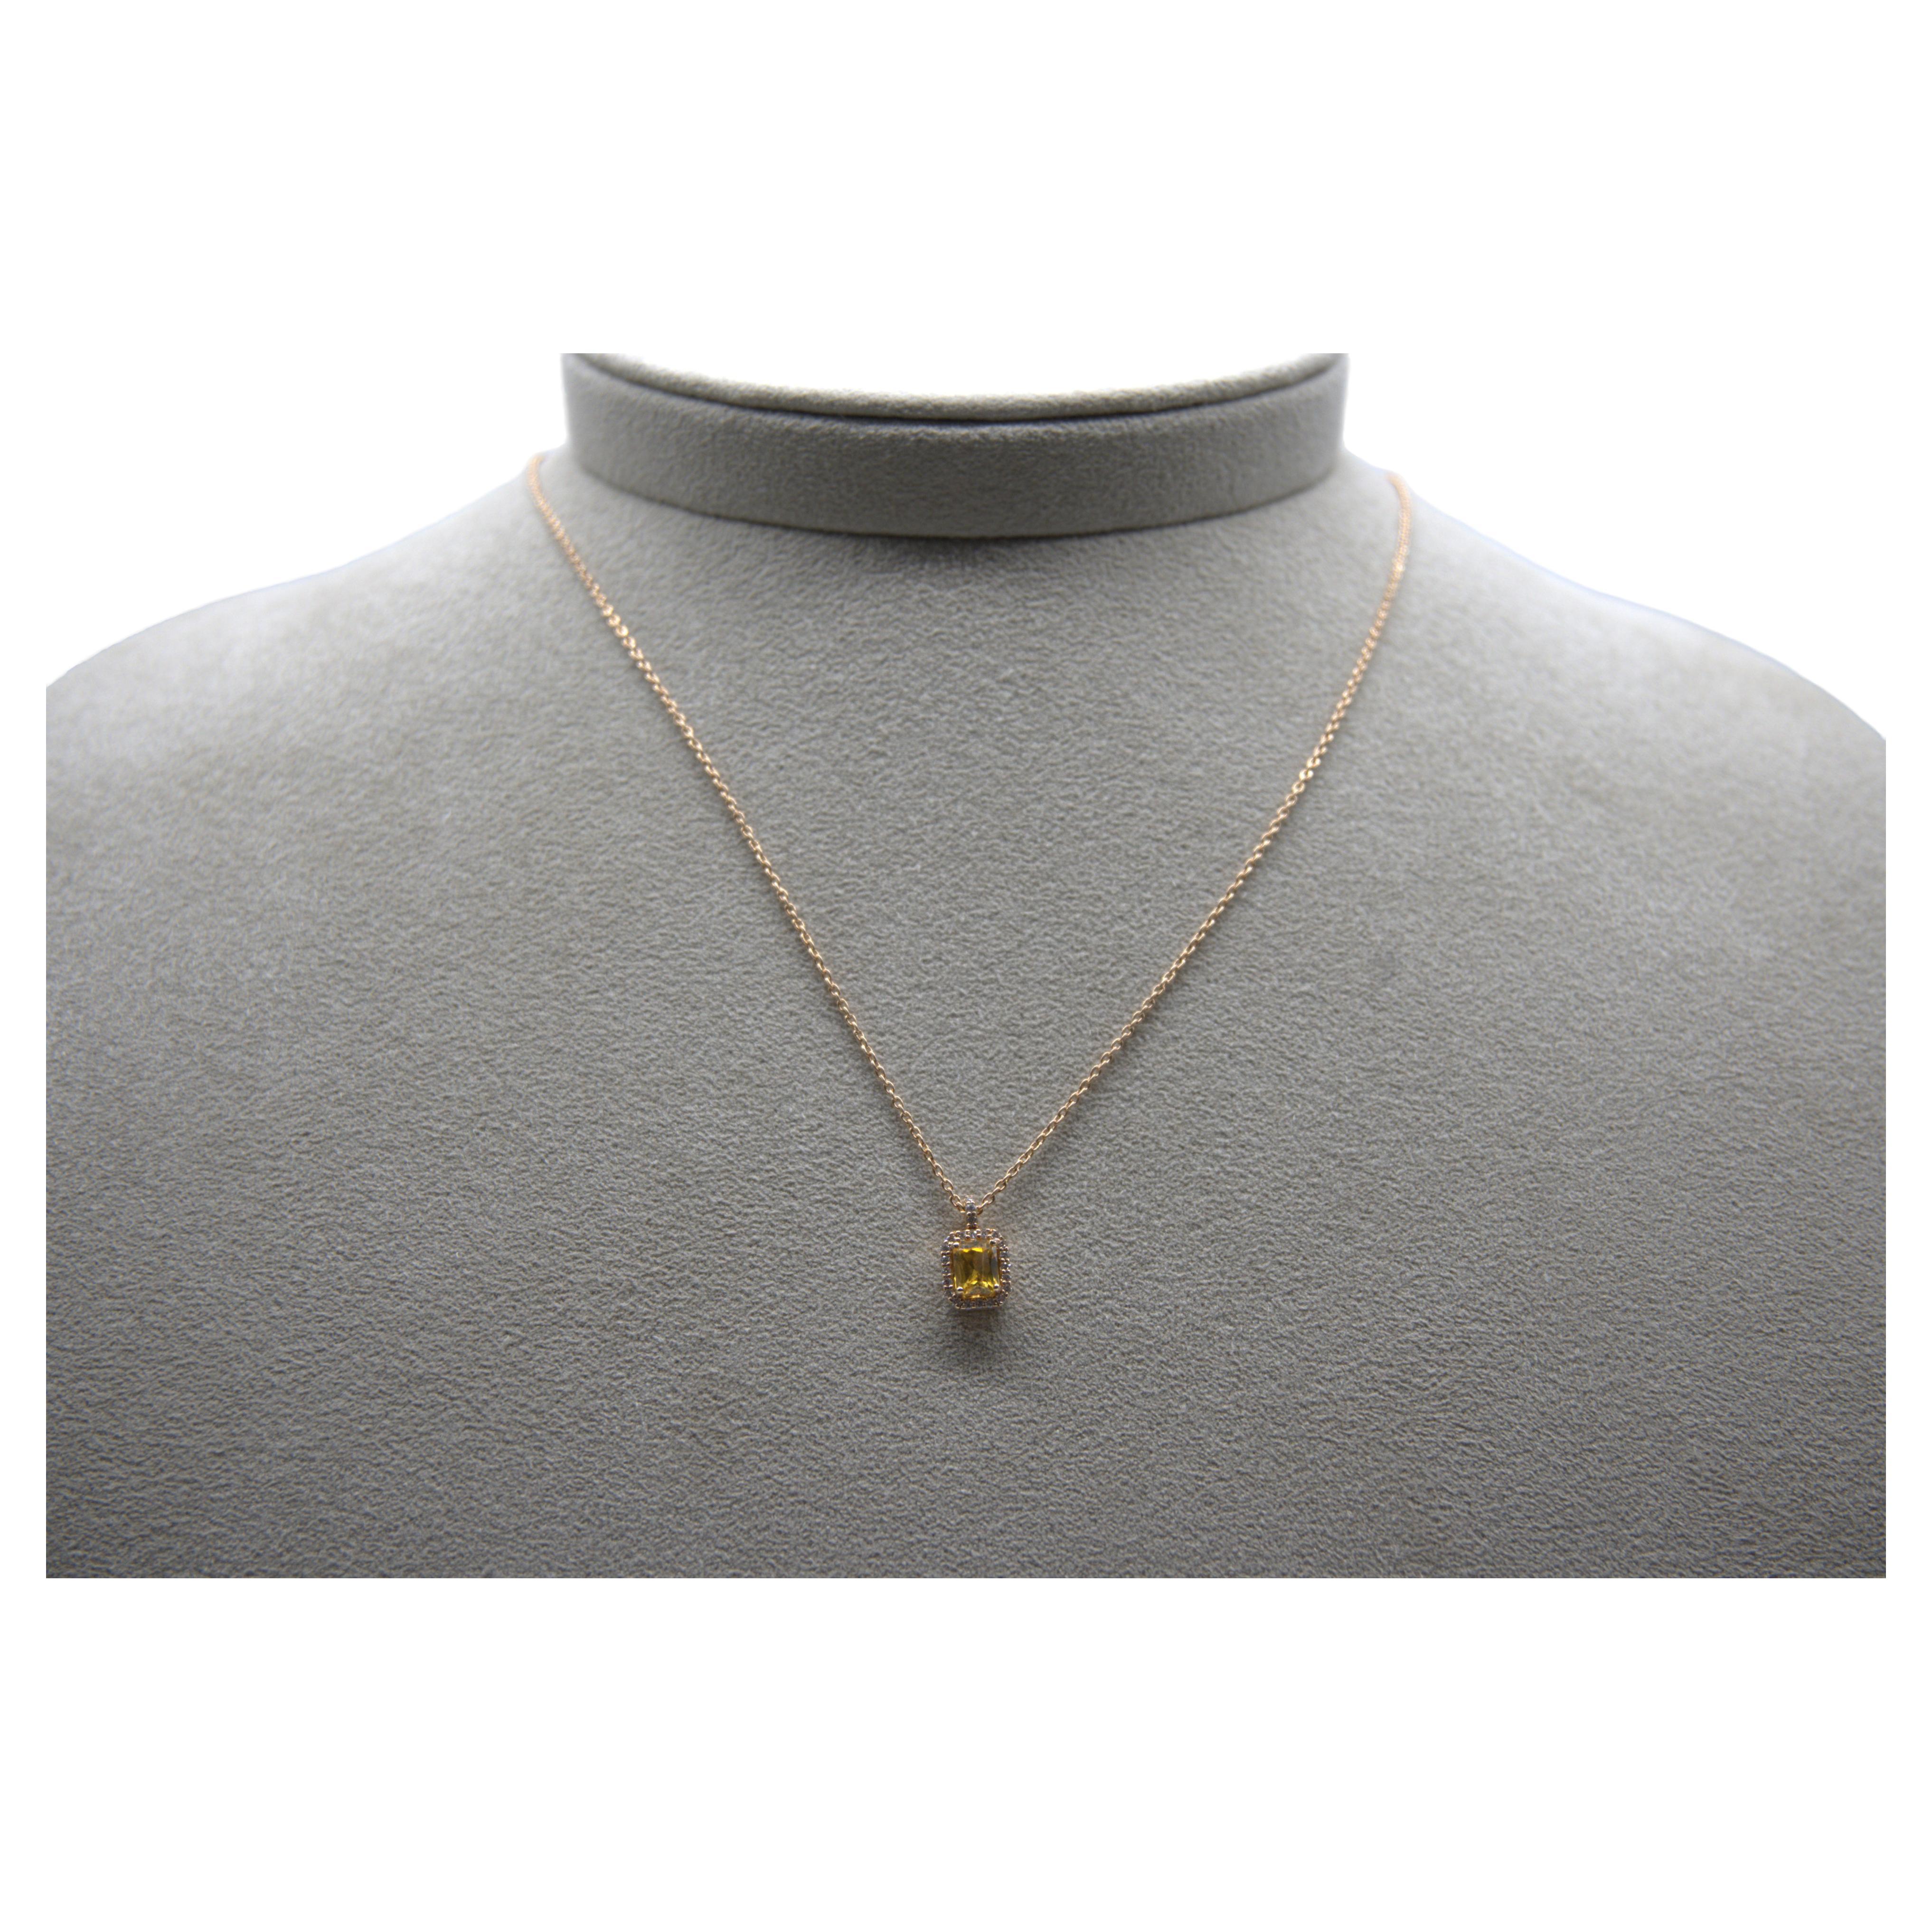 Discover our elegant Yellow Sapphire and Diamond Pendant Necklace, a piece of jewelry that embodies refinement. This jewel is designed for women who seek both sophistication and sparkle in an accessory.

The magnificent 0.610-carat yellow sapphire